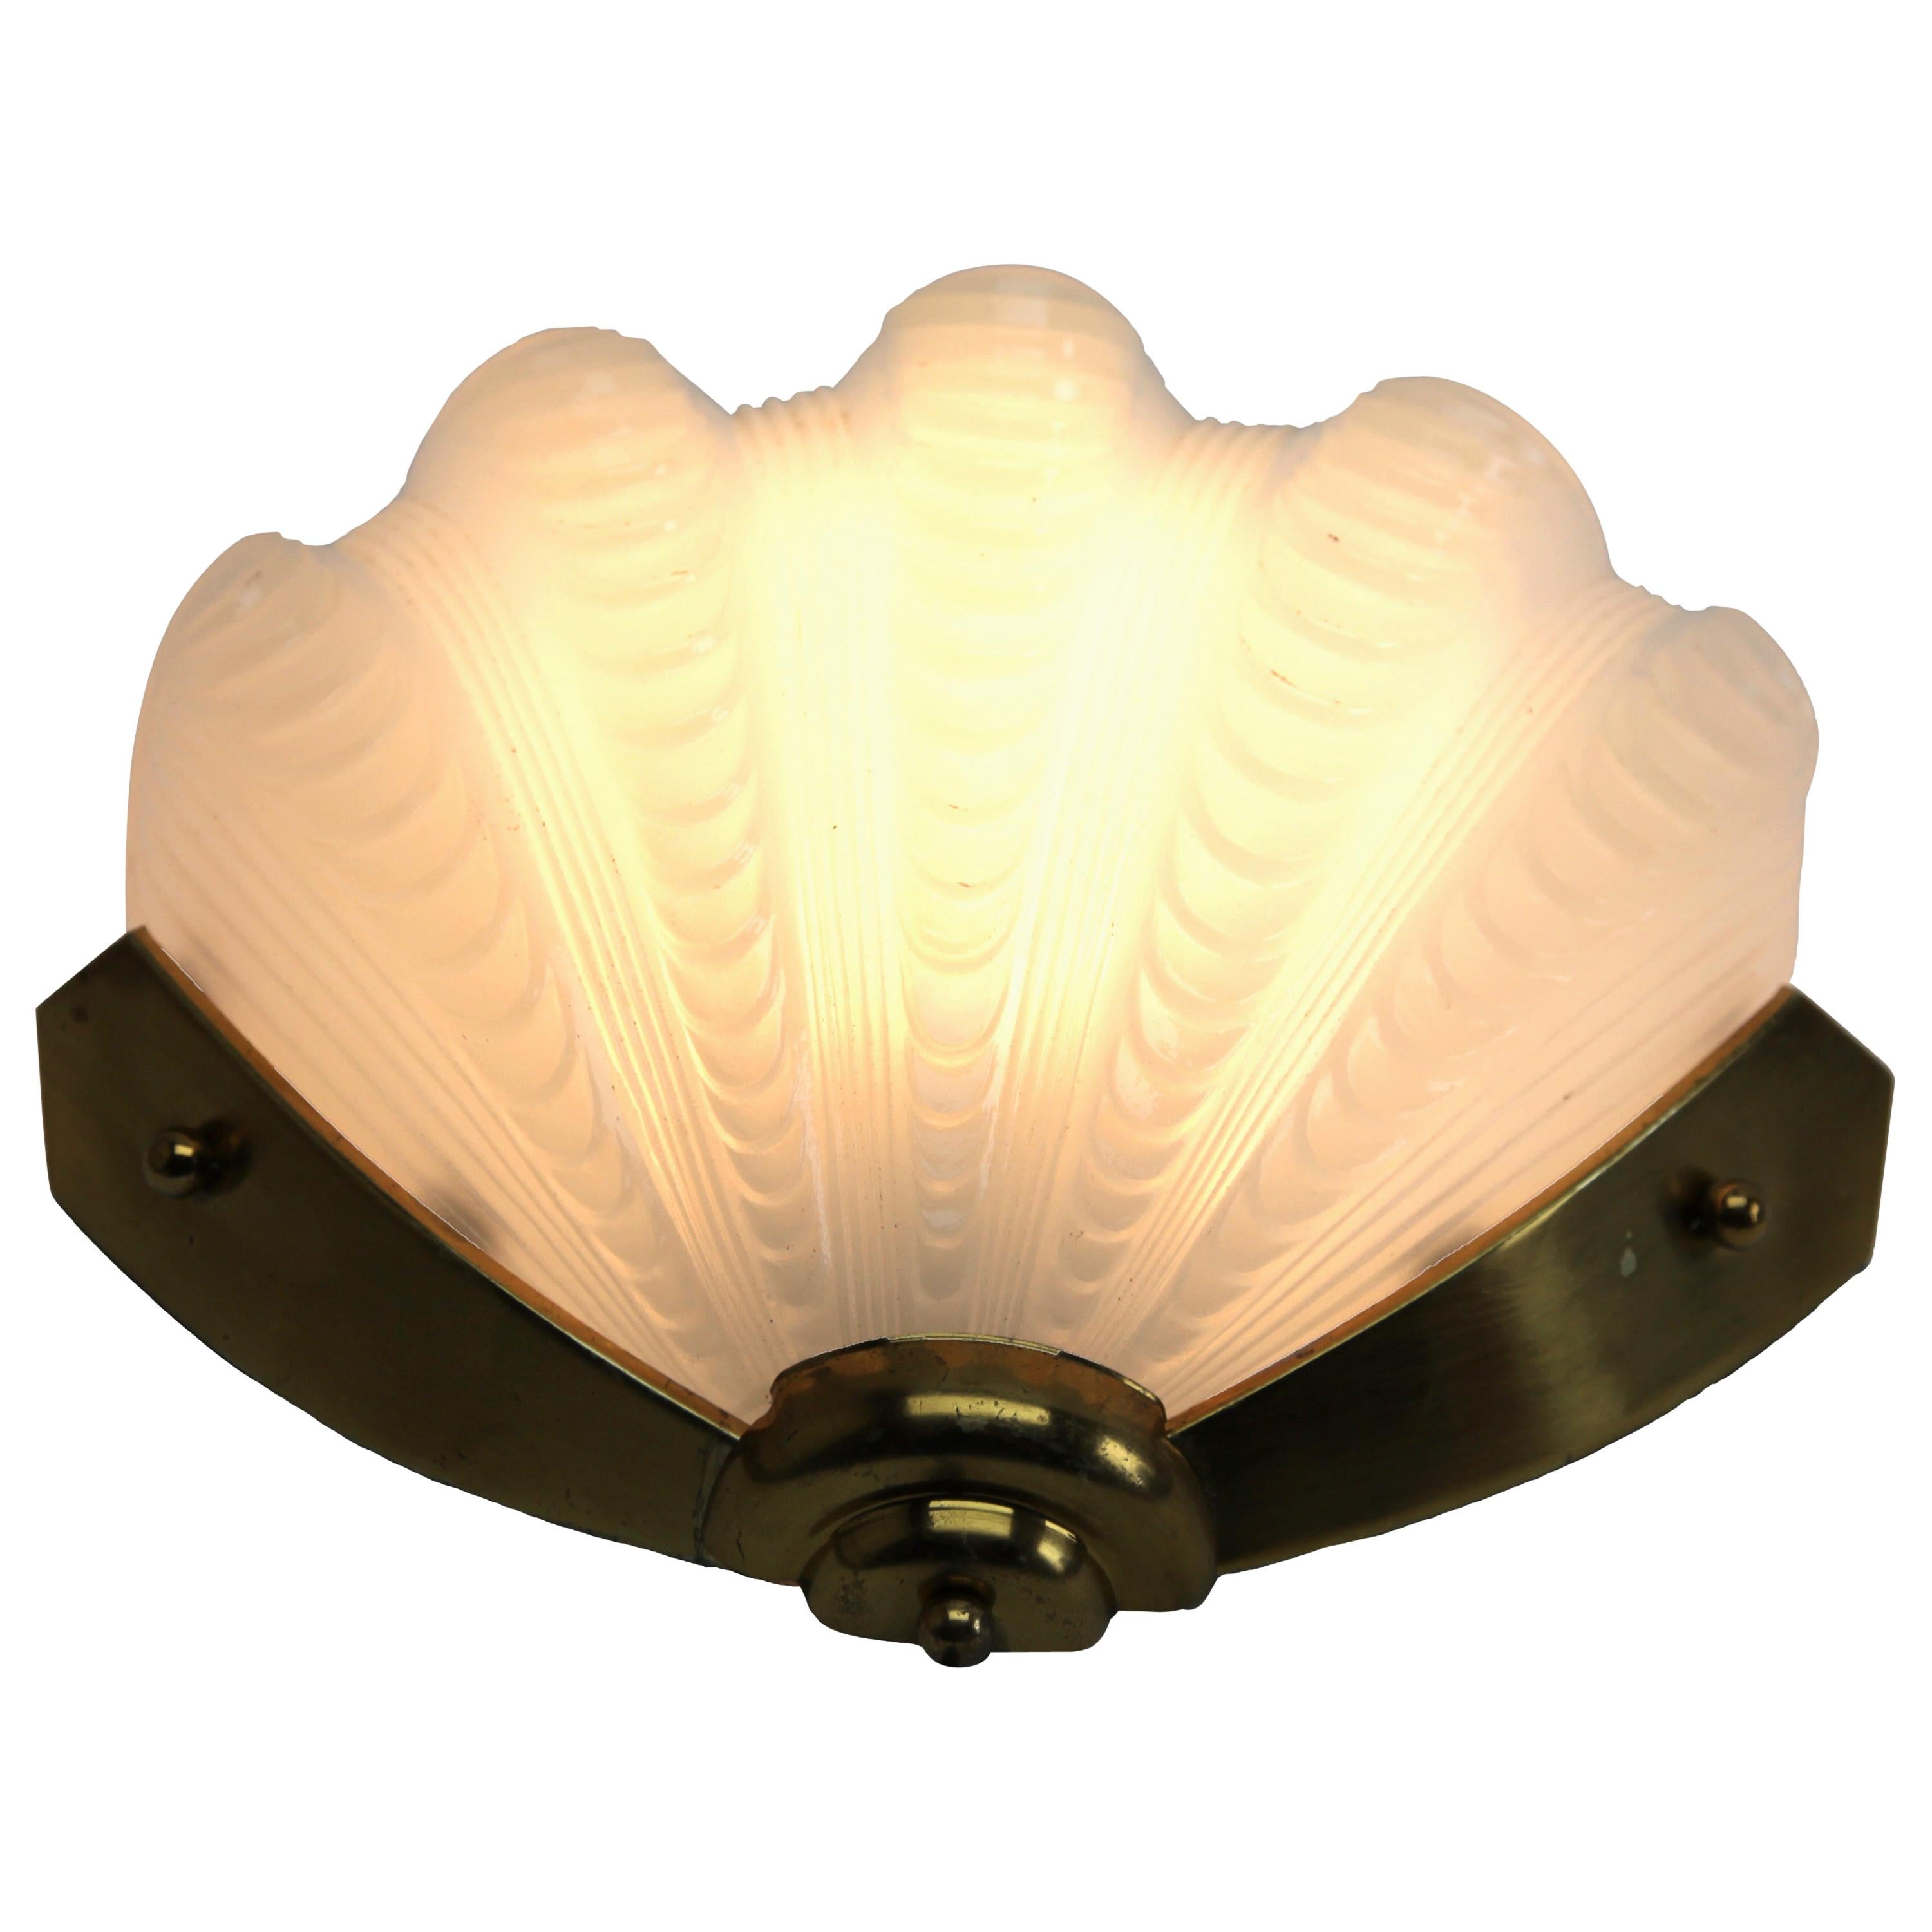 clamshell wall sconce